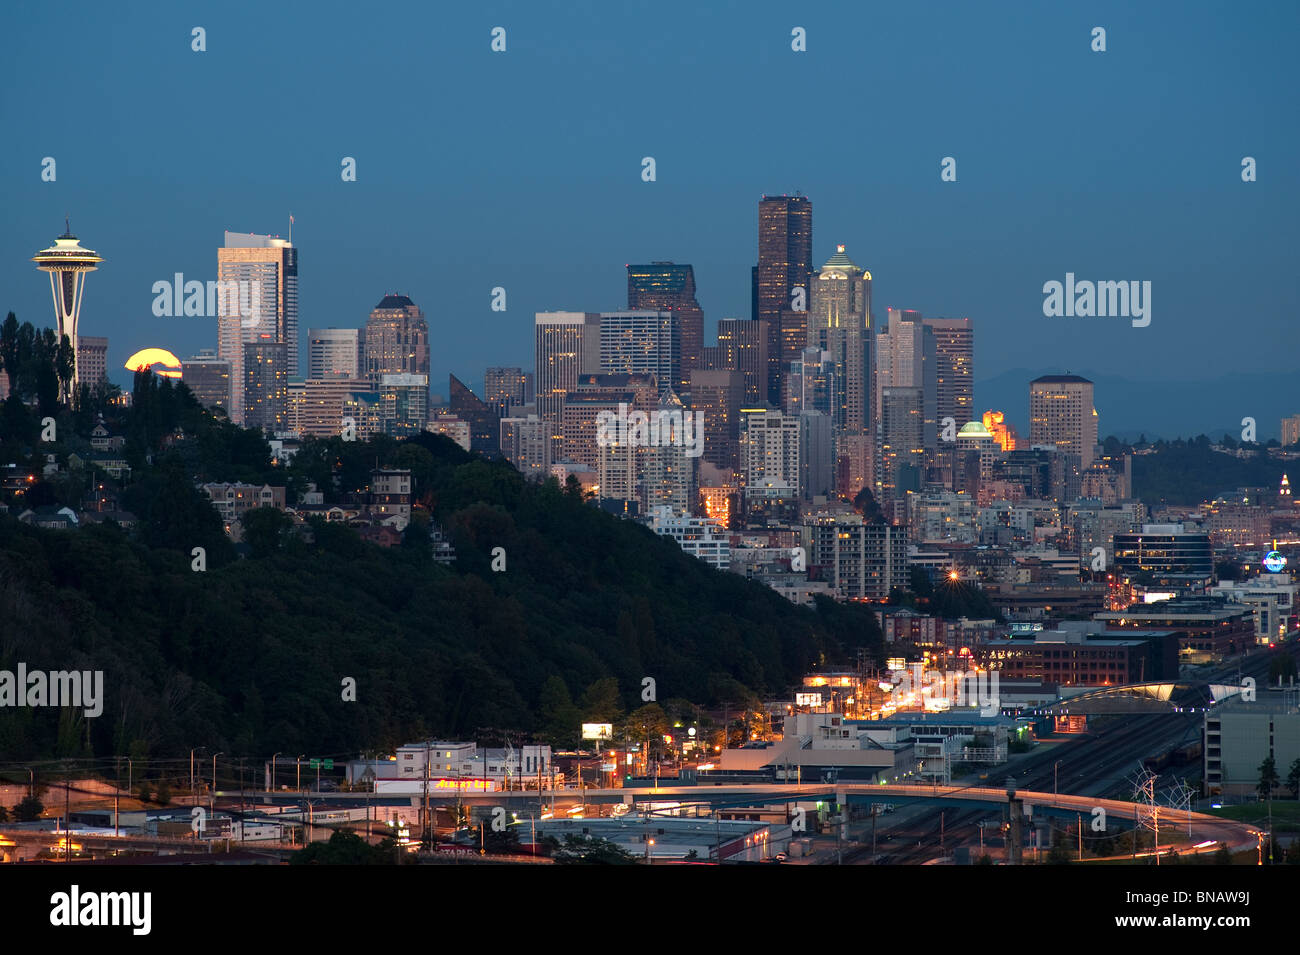 Retro Image of Seattle skyline with moon rising over city. Stock Photo